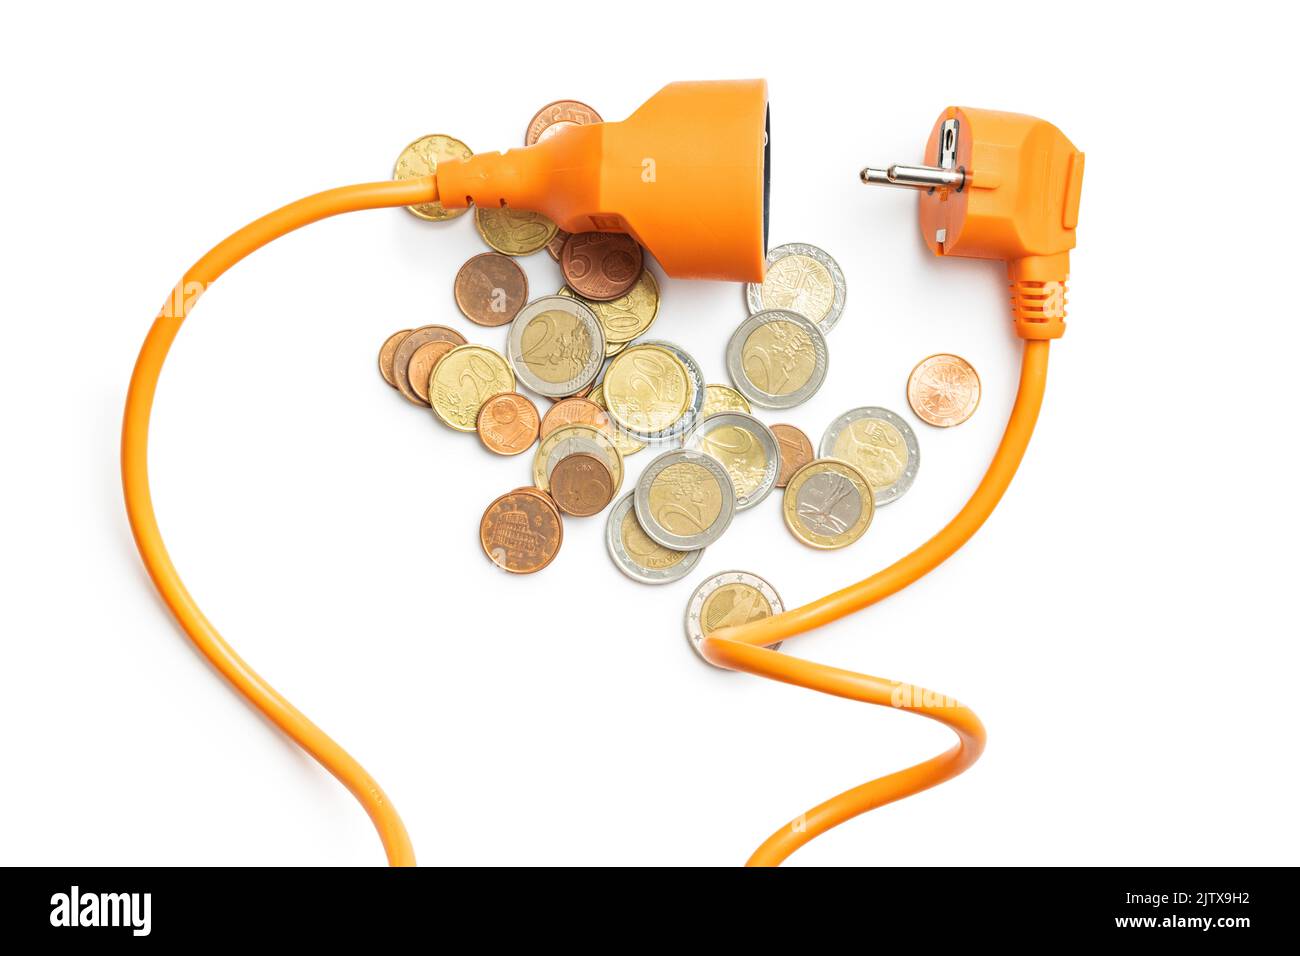 Electric plug and euro coins isolated on the white background. Concept of increasing electricity prices. Stock Photo